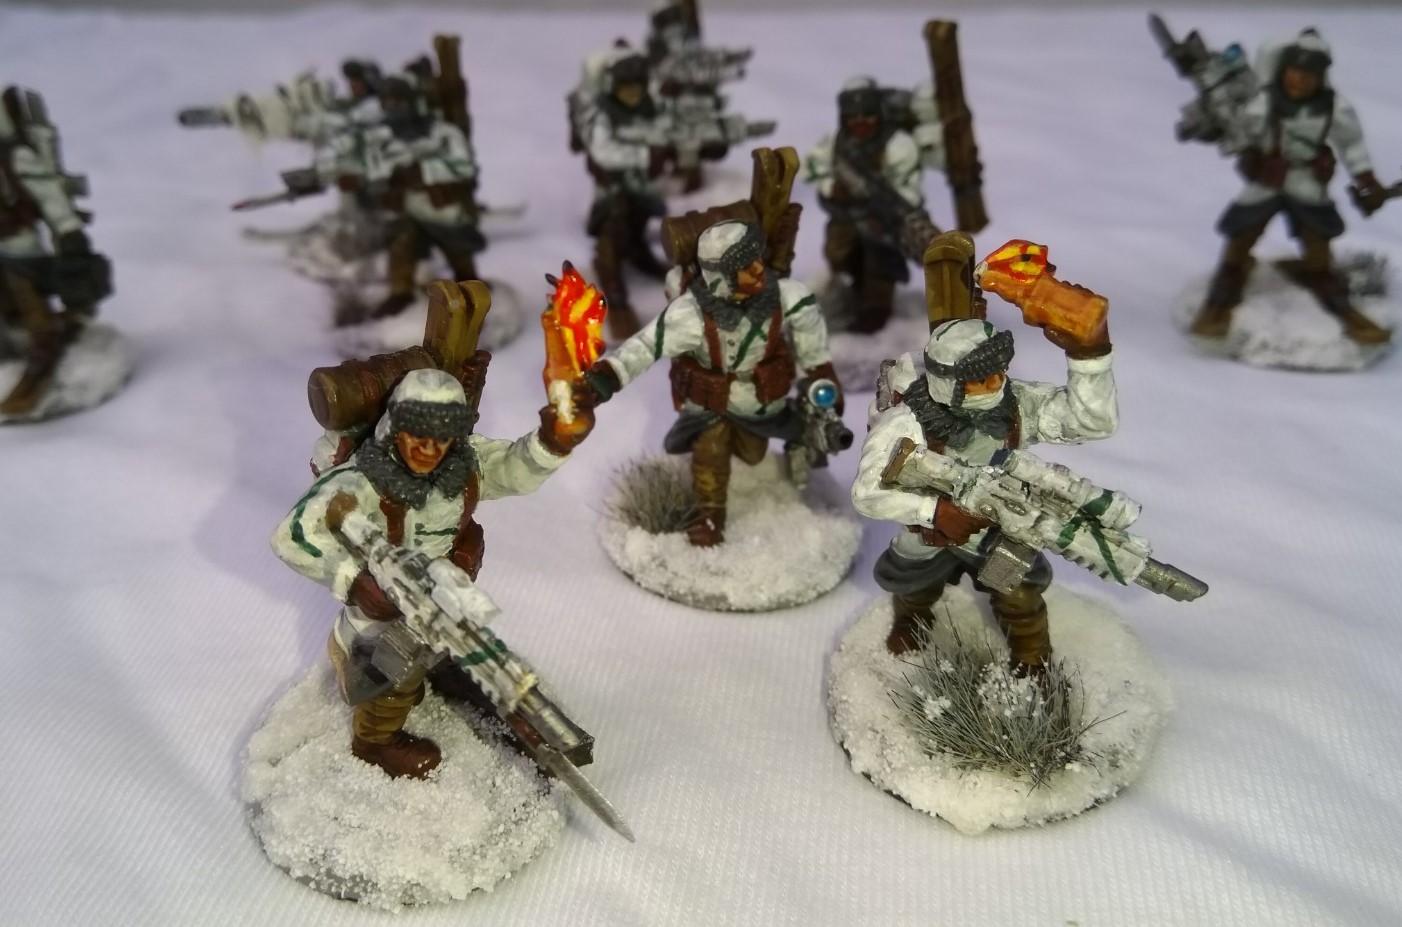 Anvil Industry, Astra Militarum, Finland, Flames, Imperial Guard, Light Infantry, Molotov Cocktails, Mountain Troops, Ski Soldiers, Skis, Snow, Winter War